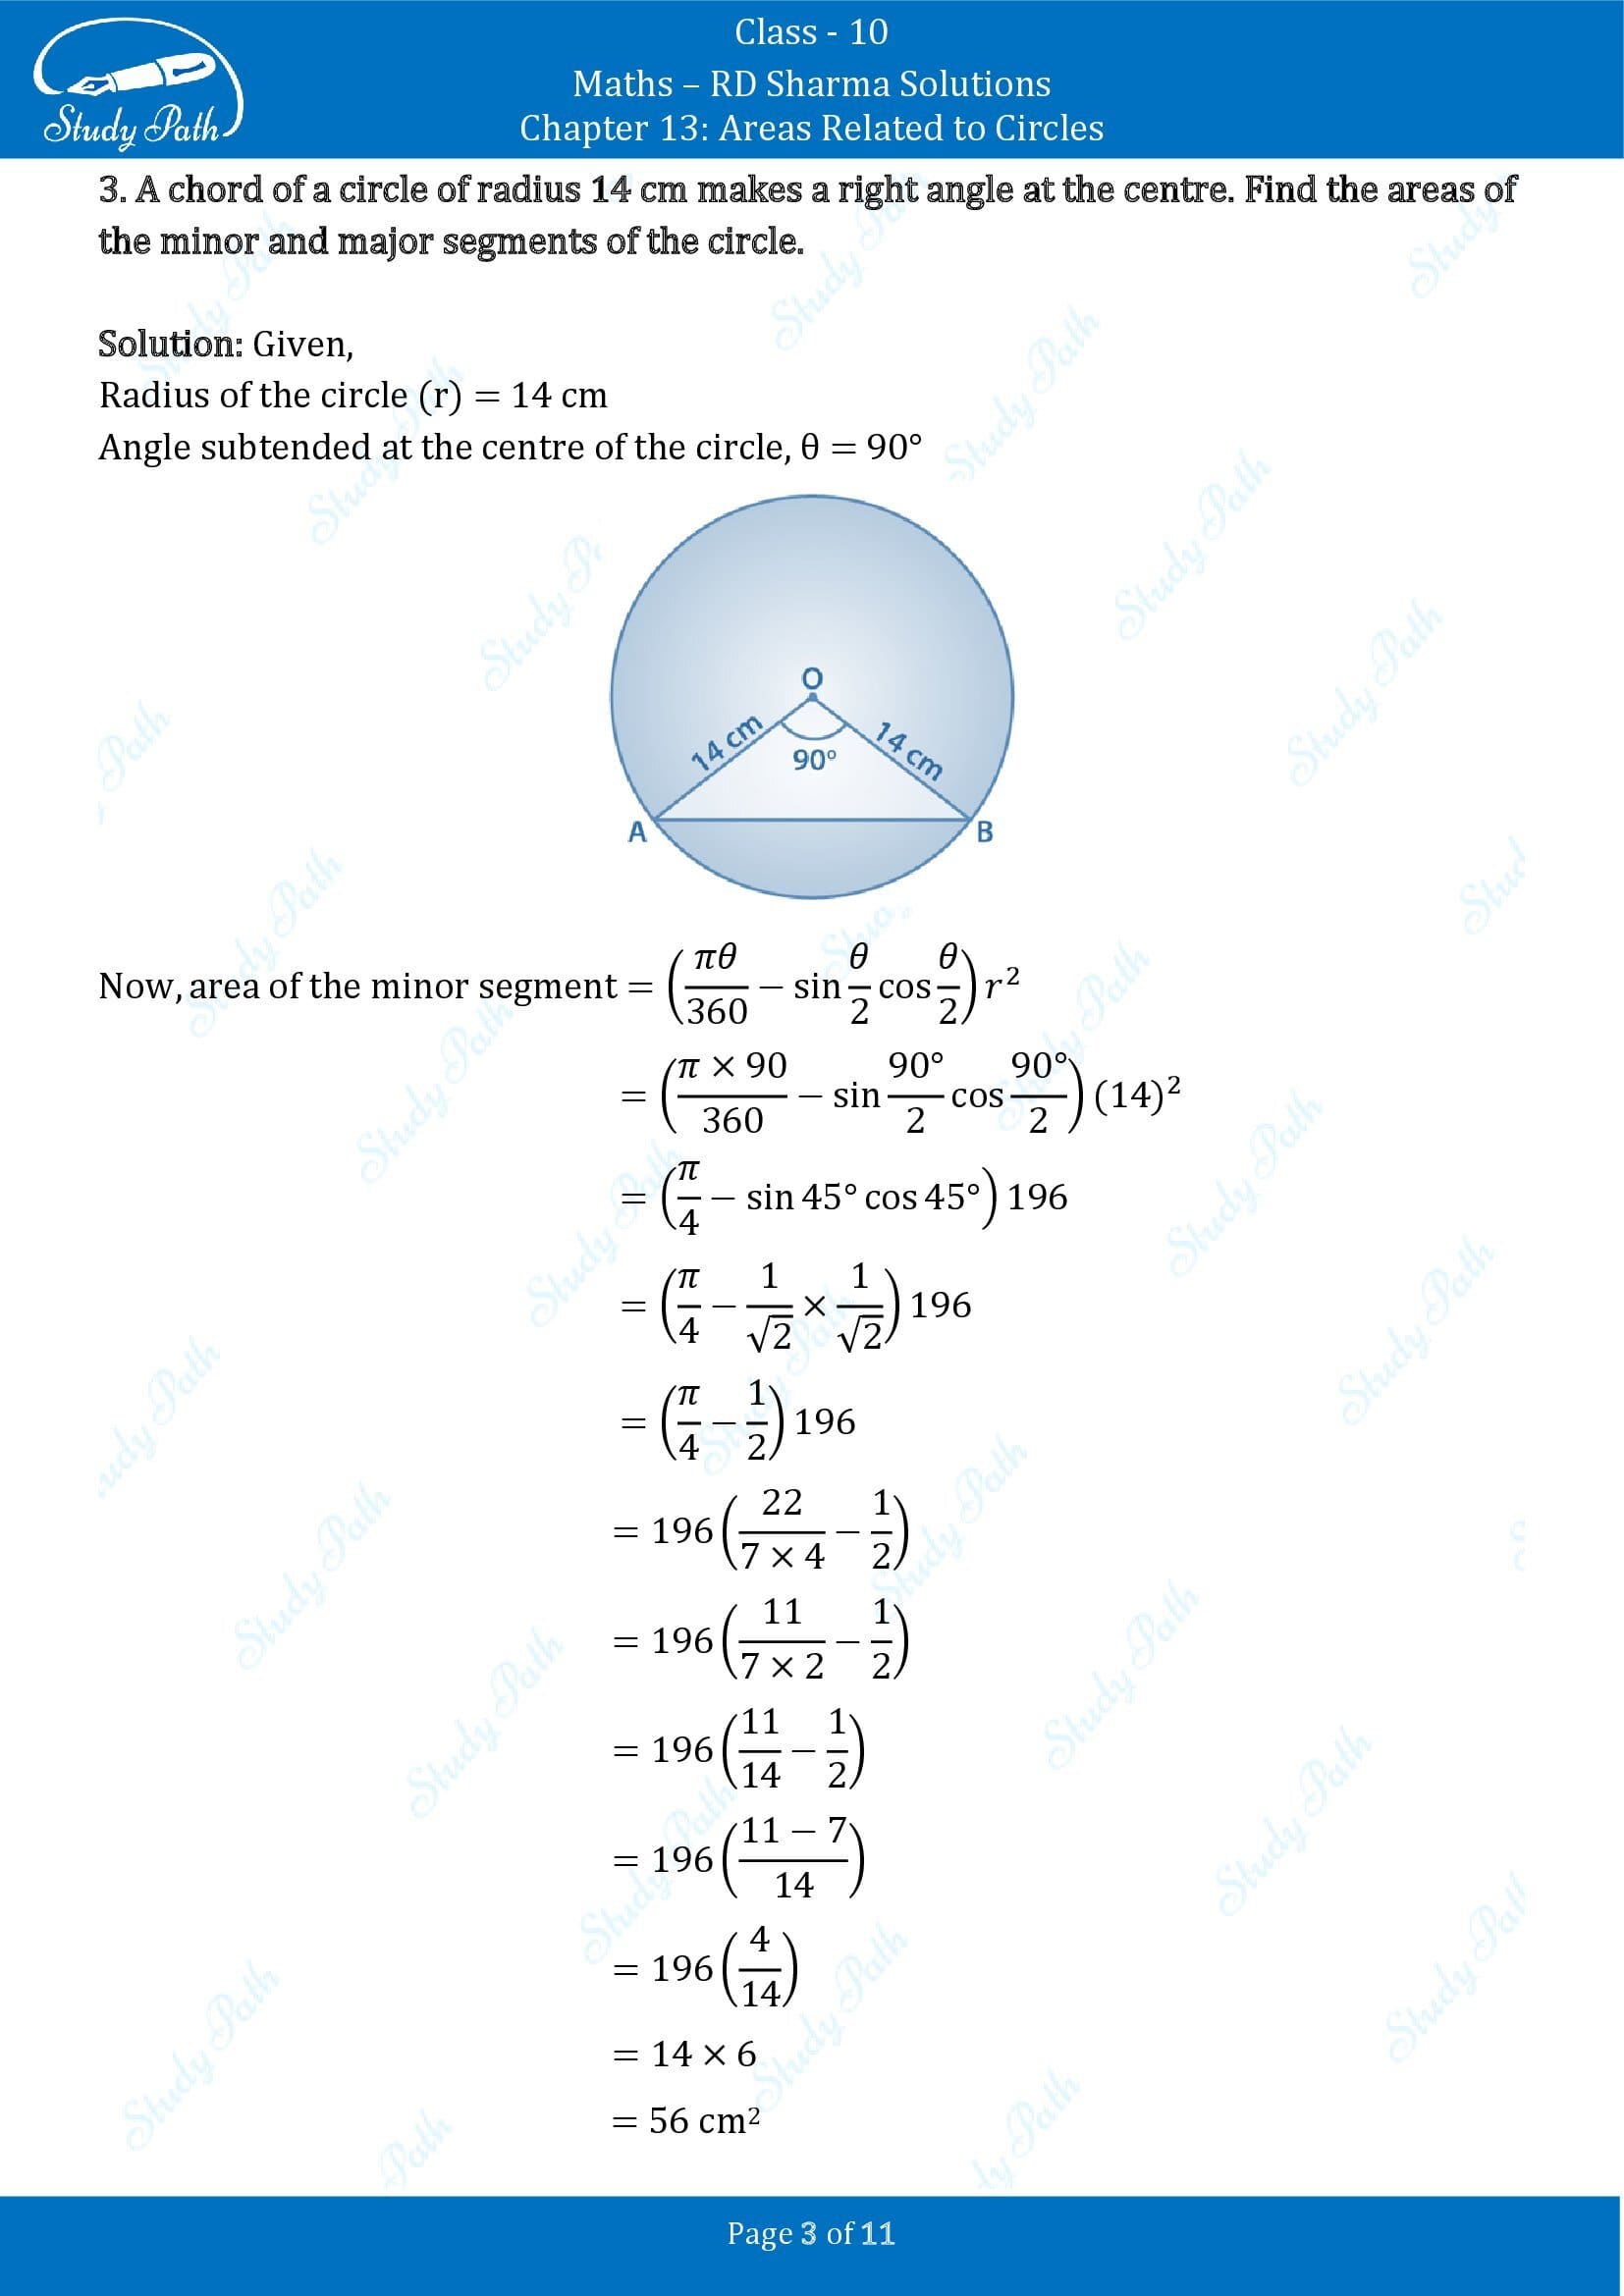 RD Sharma Solutions Class 10 Chapter 13 Areas Related to Circles Exercise 13.3 00003